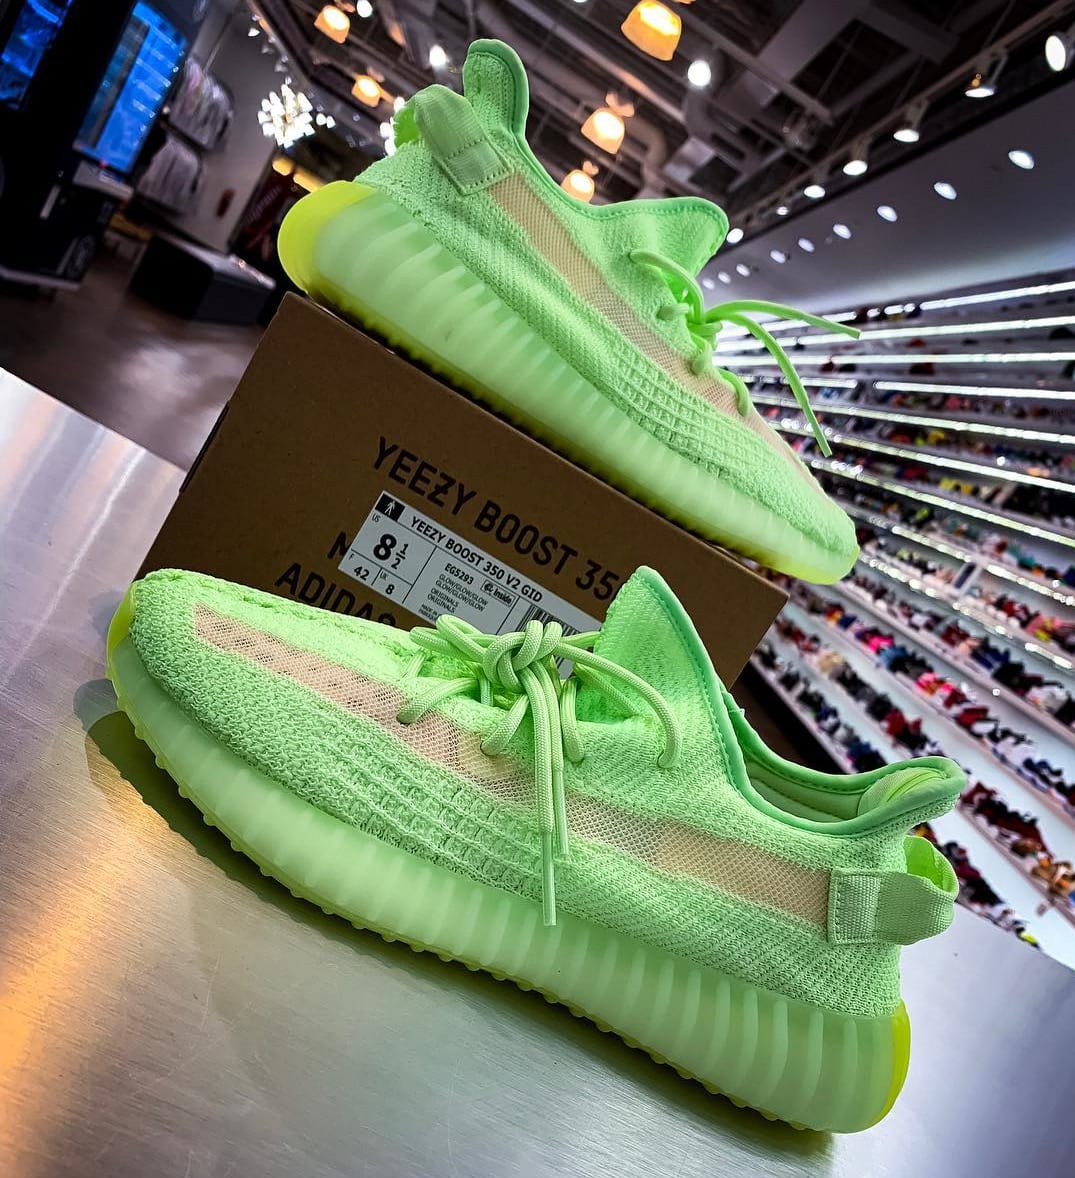 Adidas Announces the 'Glow' Yeezy Boost 350 V2 | Complex